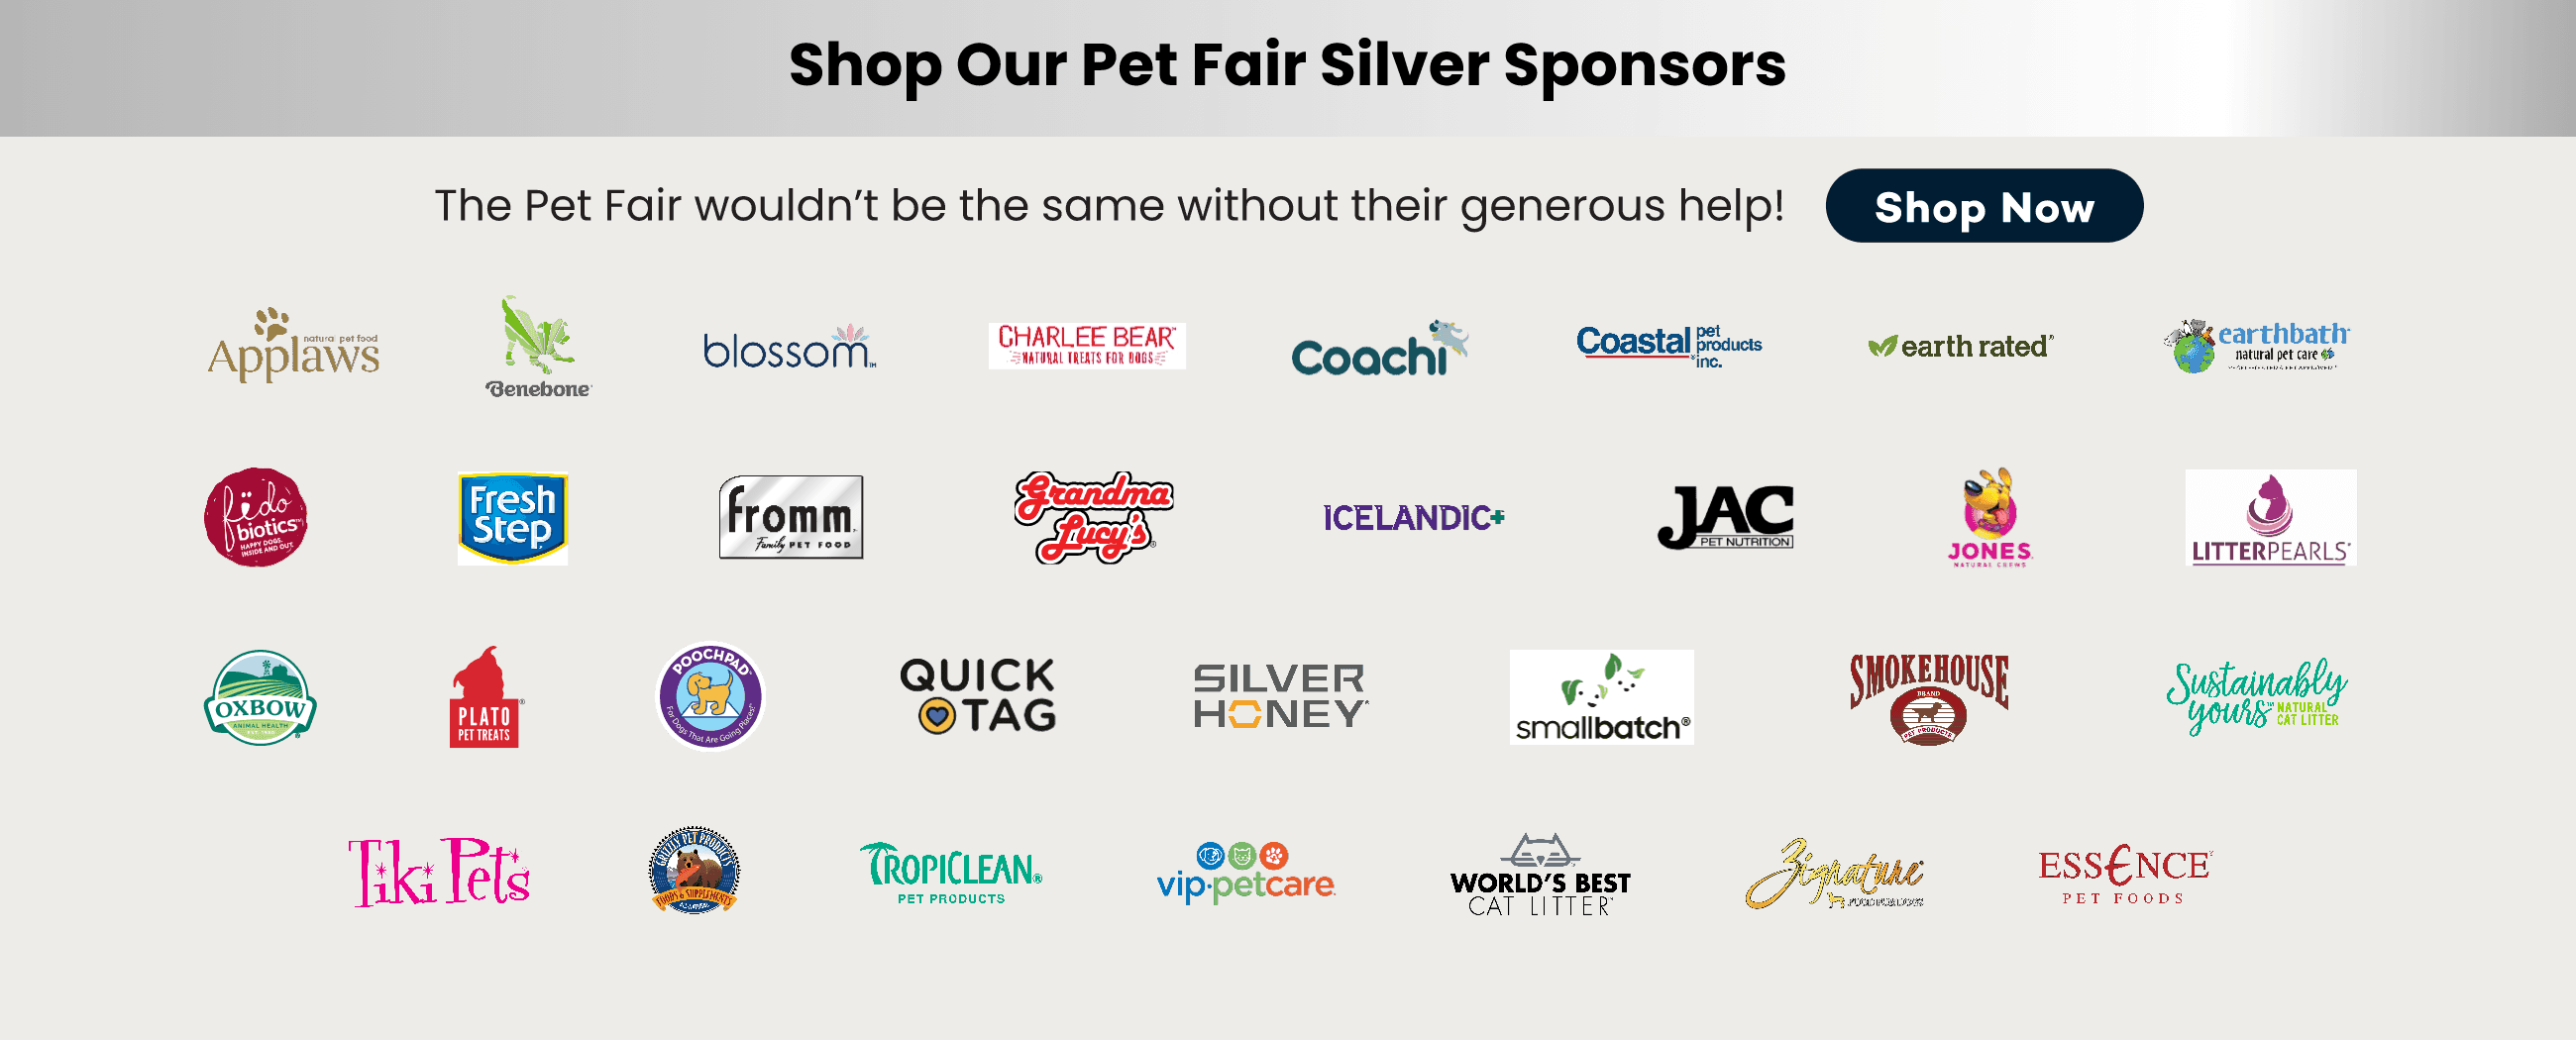 Shop Our Pet Fair Silver Sponsors! The Pet Fair wouldn't be the same without their generous help!